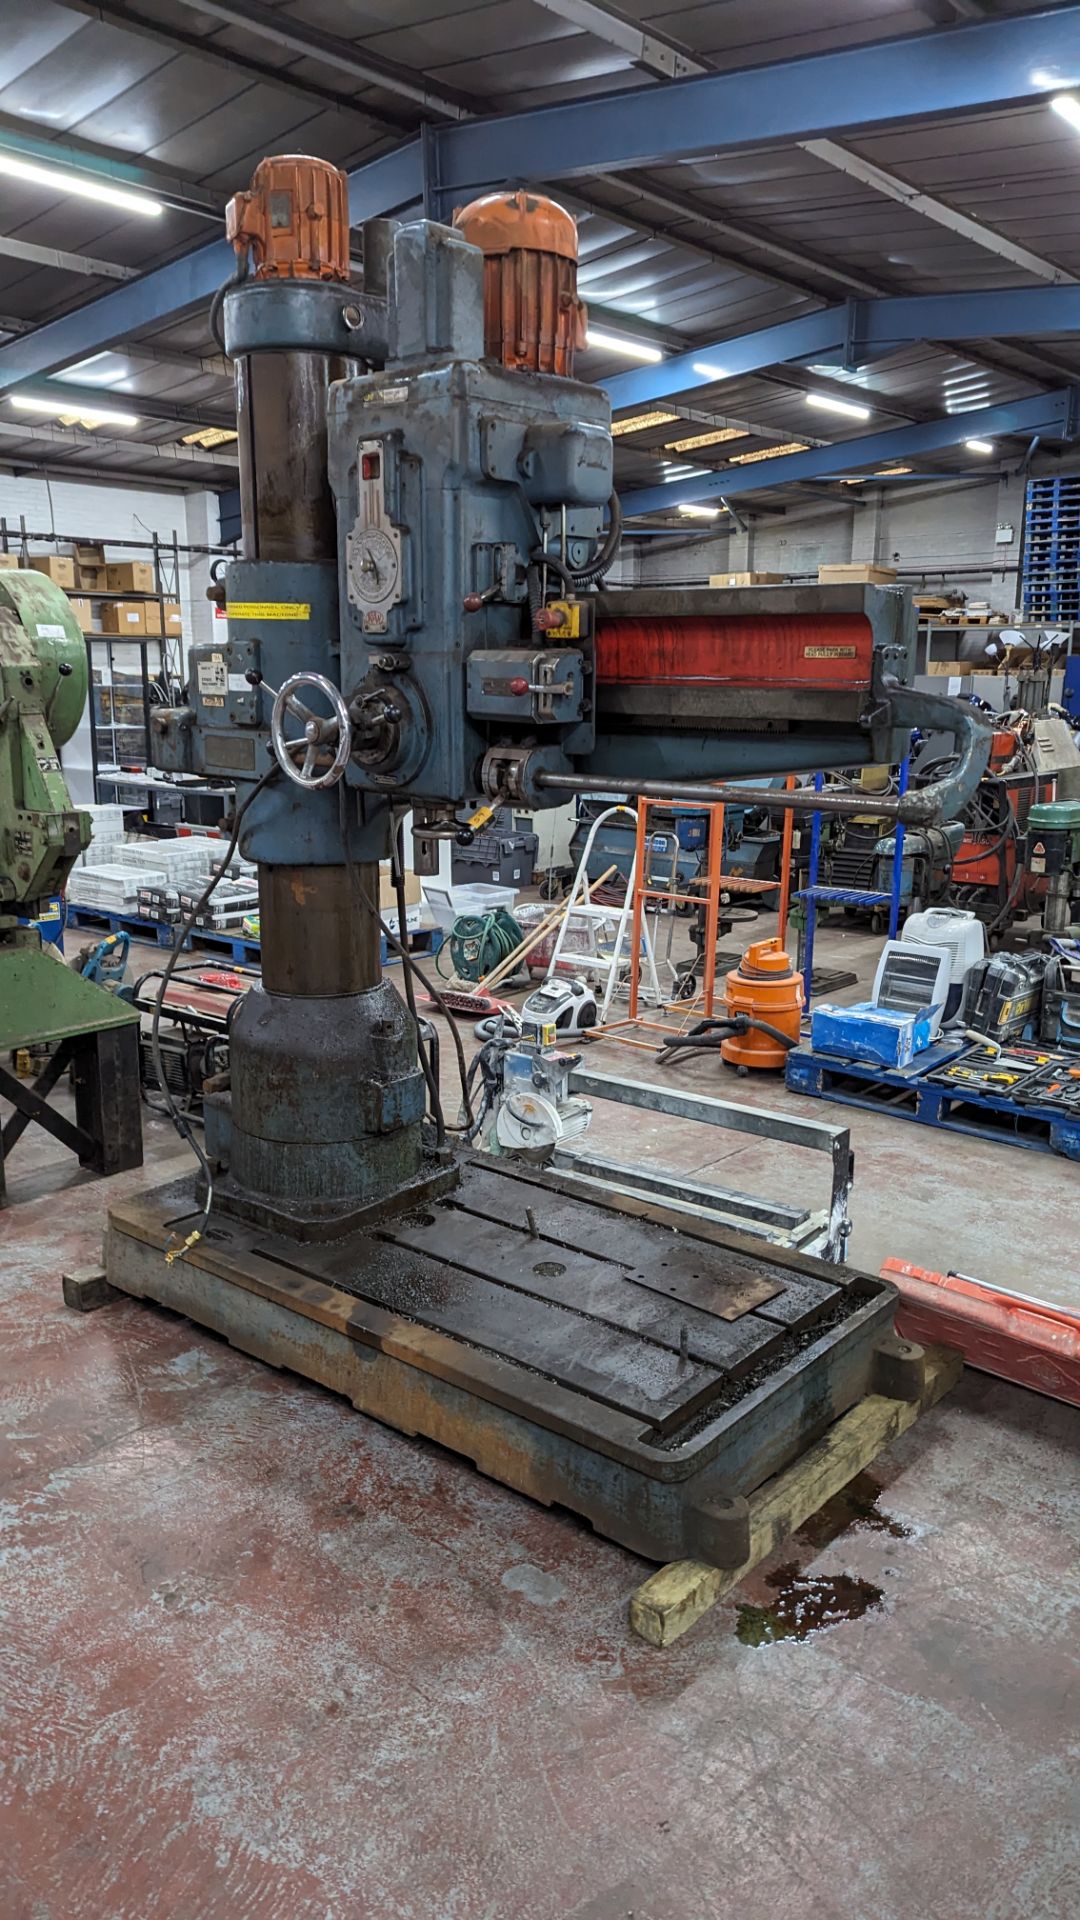 Kitchen & Wade radial arm drill type 40E26, rebuilt by Stokes Machinery Ltd